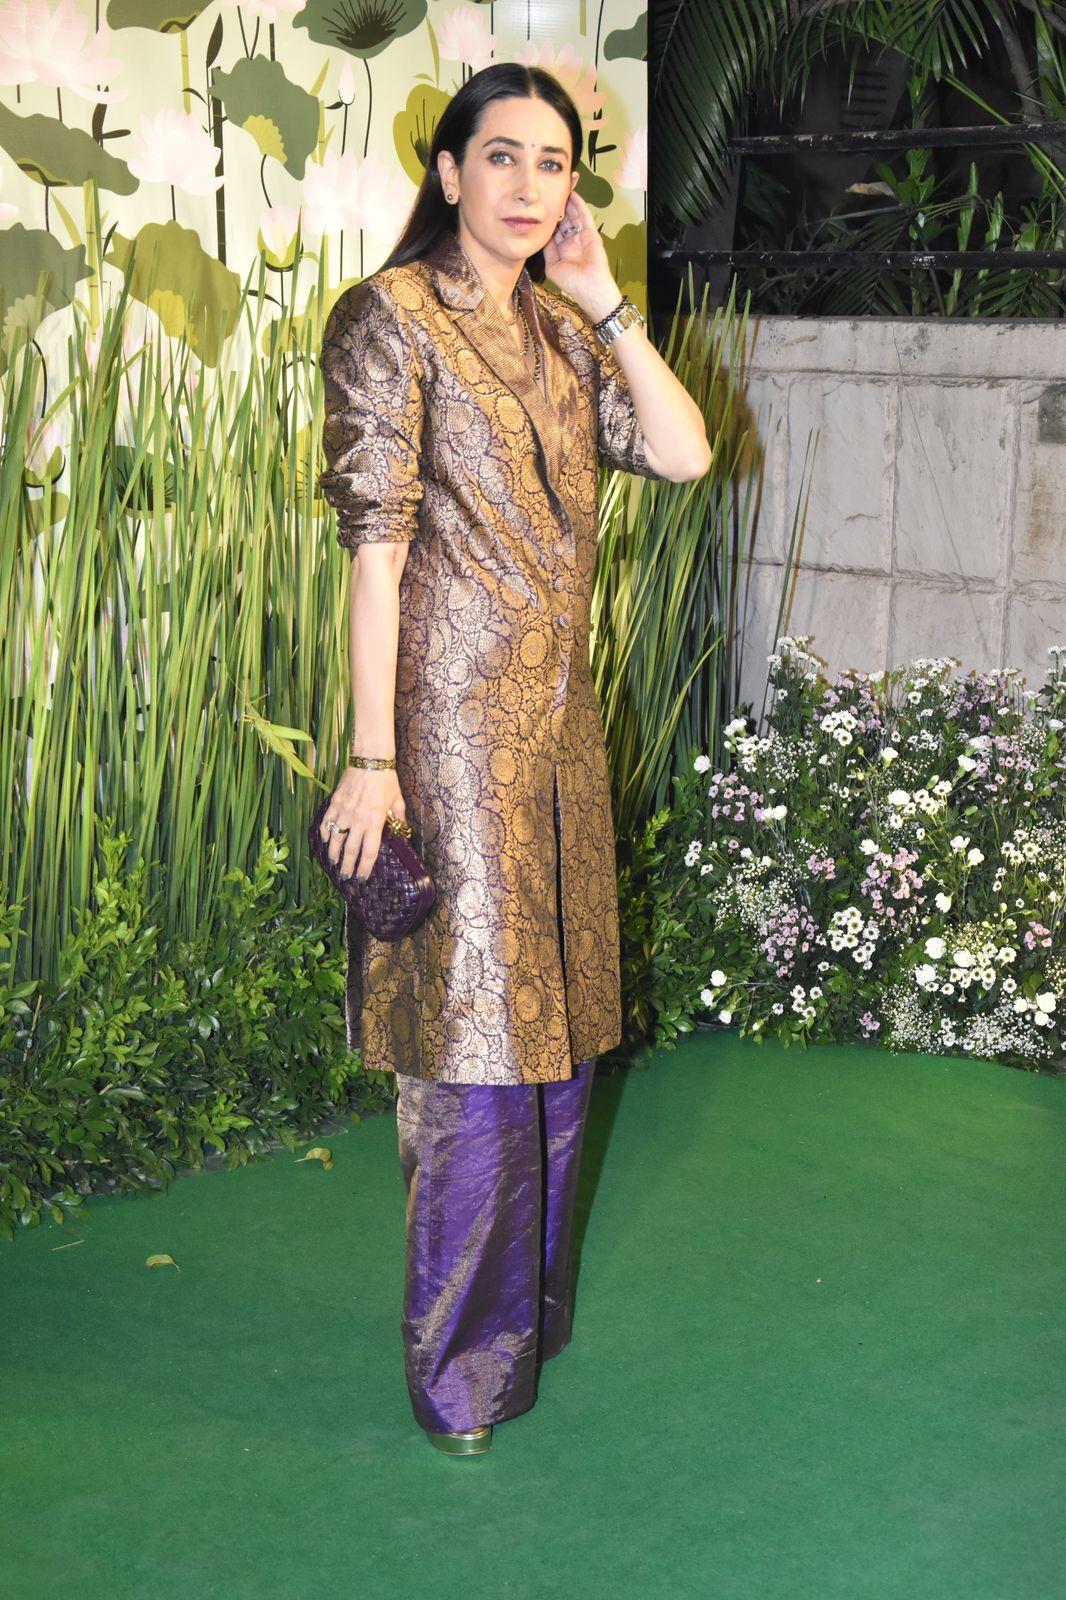 Karisma Kapoor looked stunning in her chosen attire for the evening